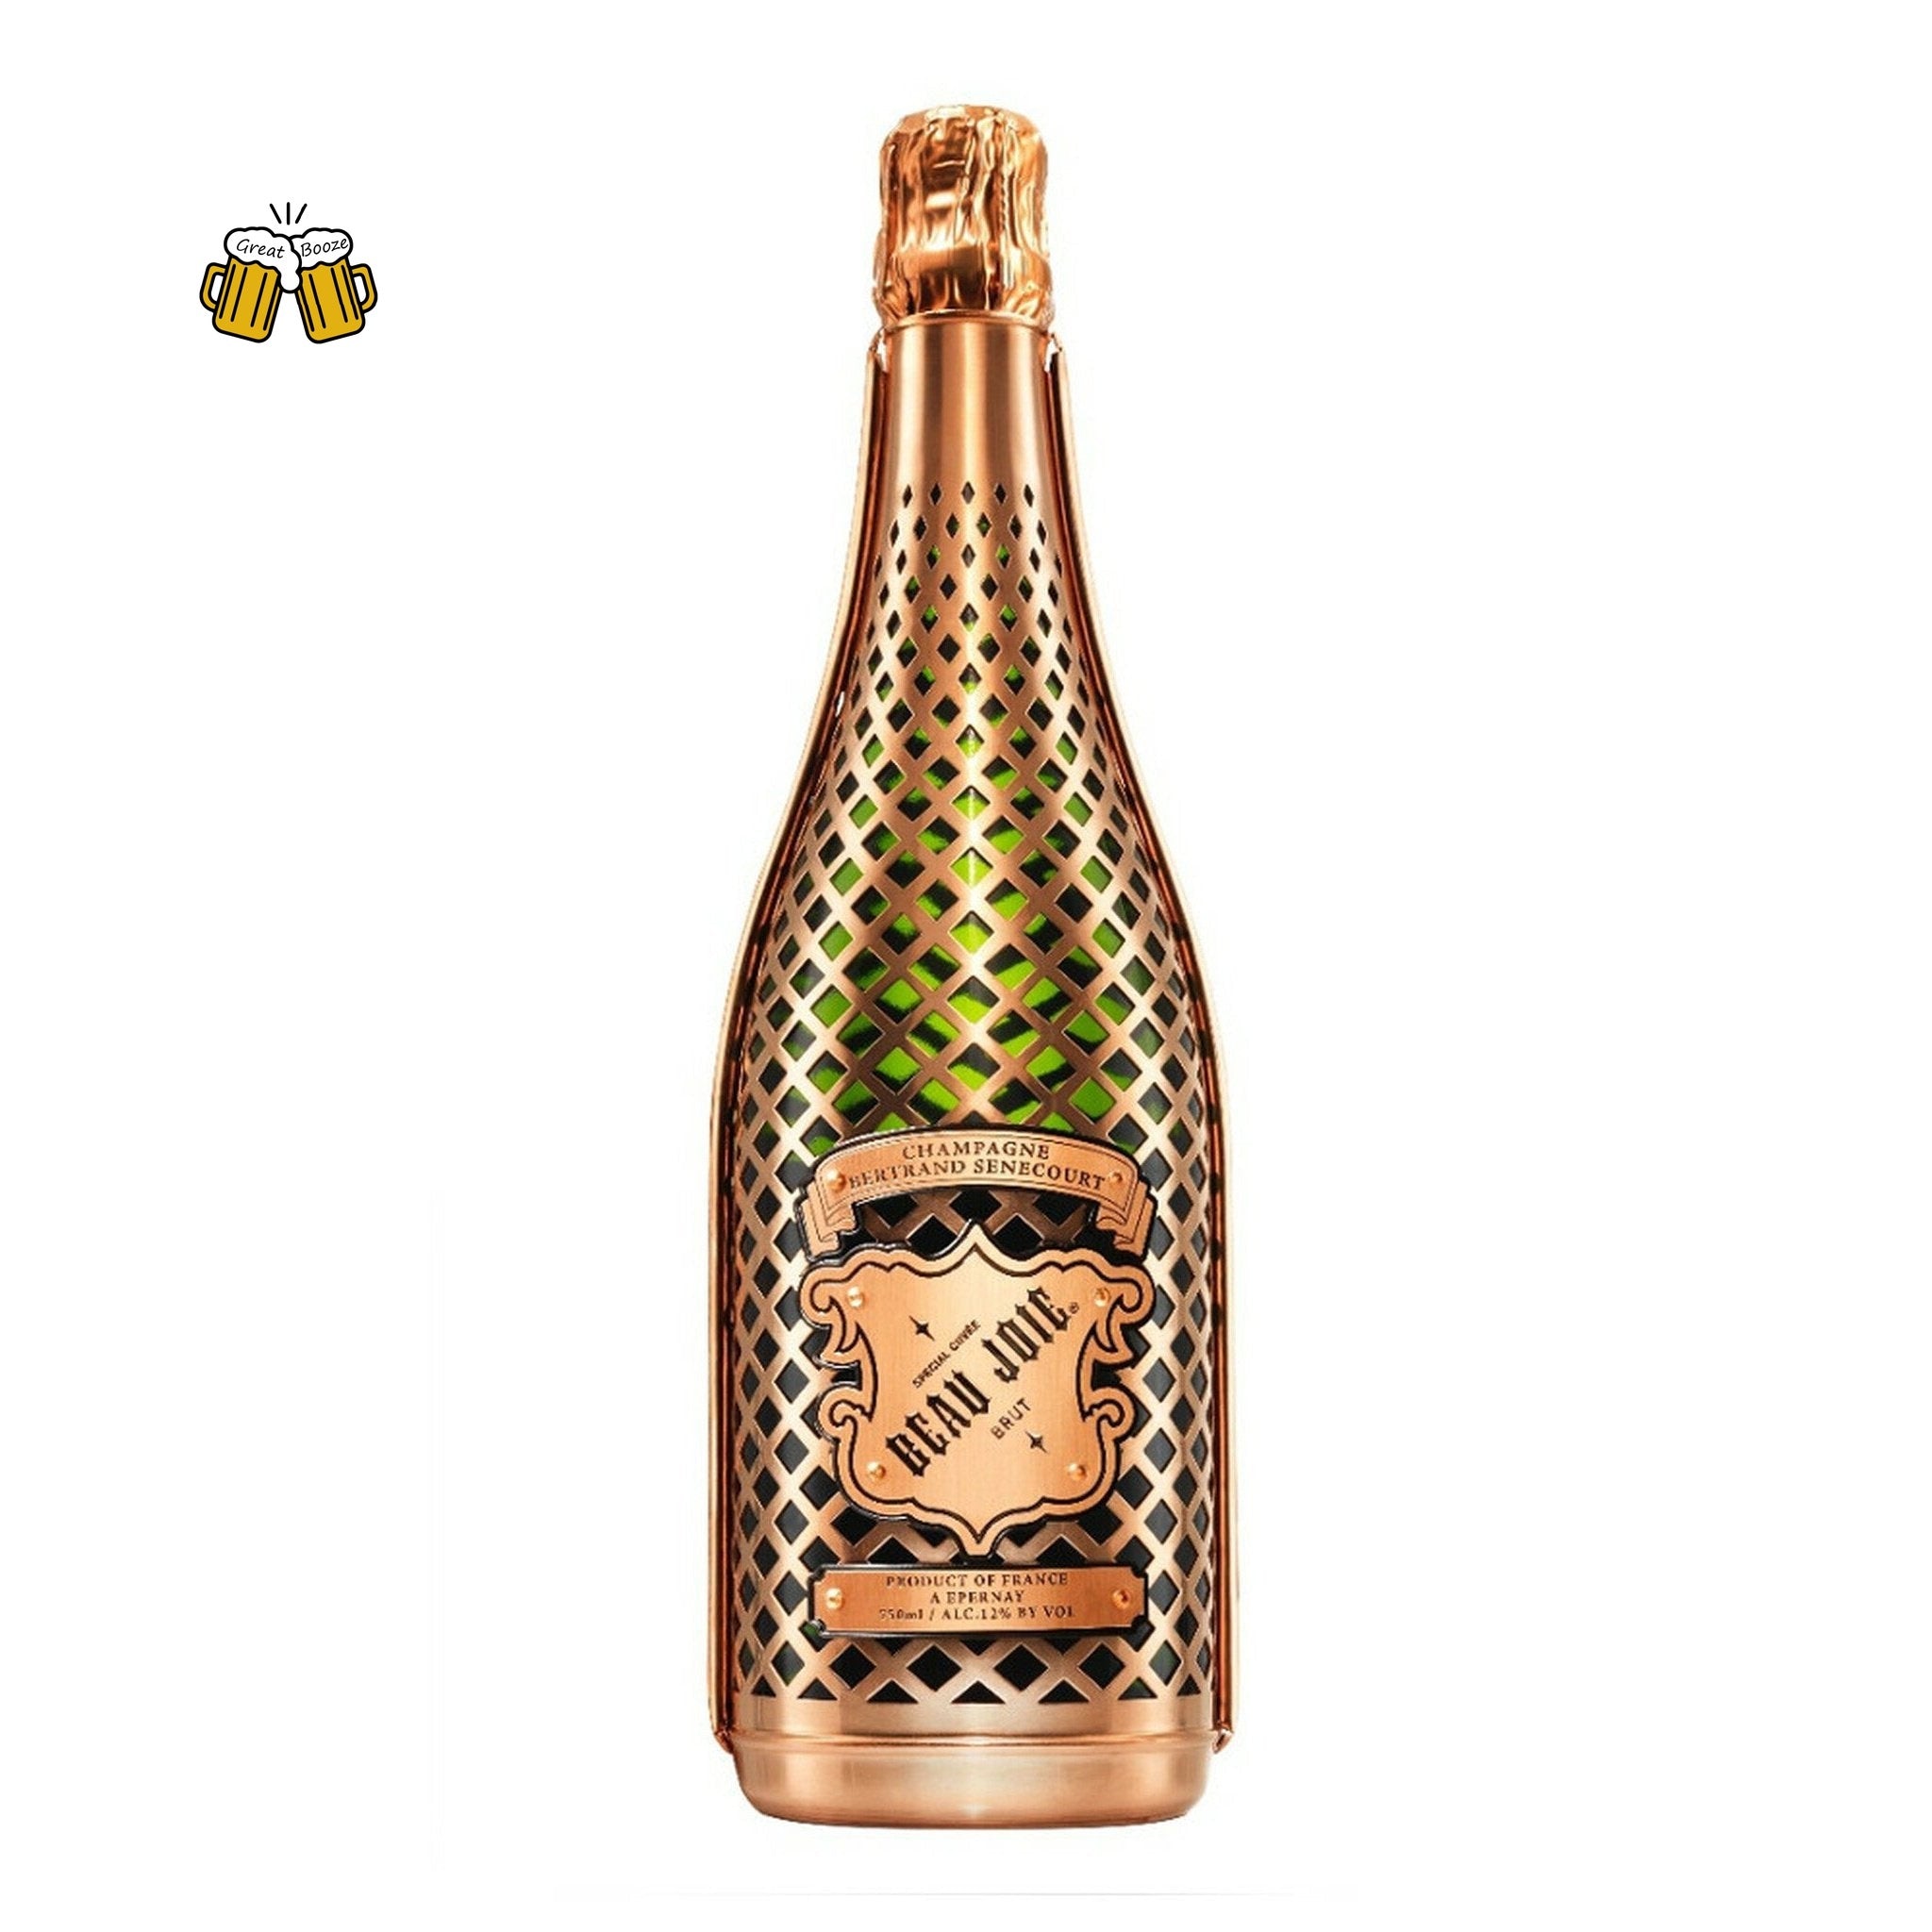 Beau Joie Special Cuvee Brut Champagne 750ml